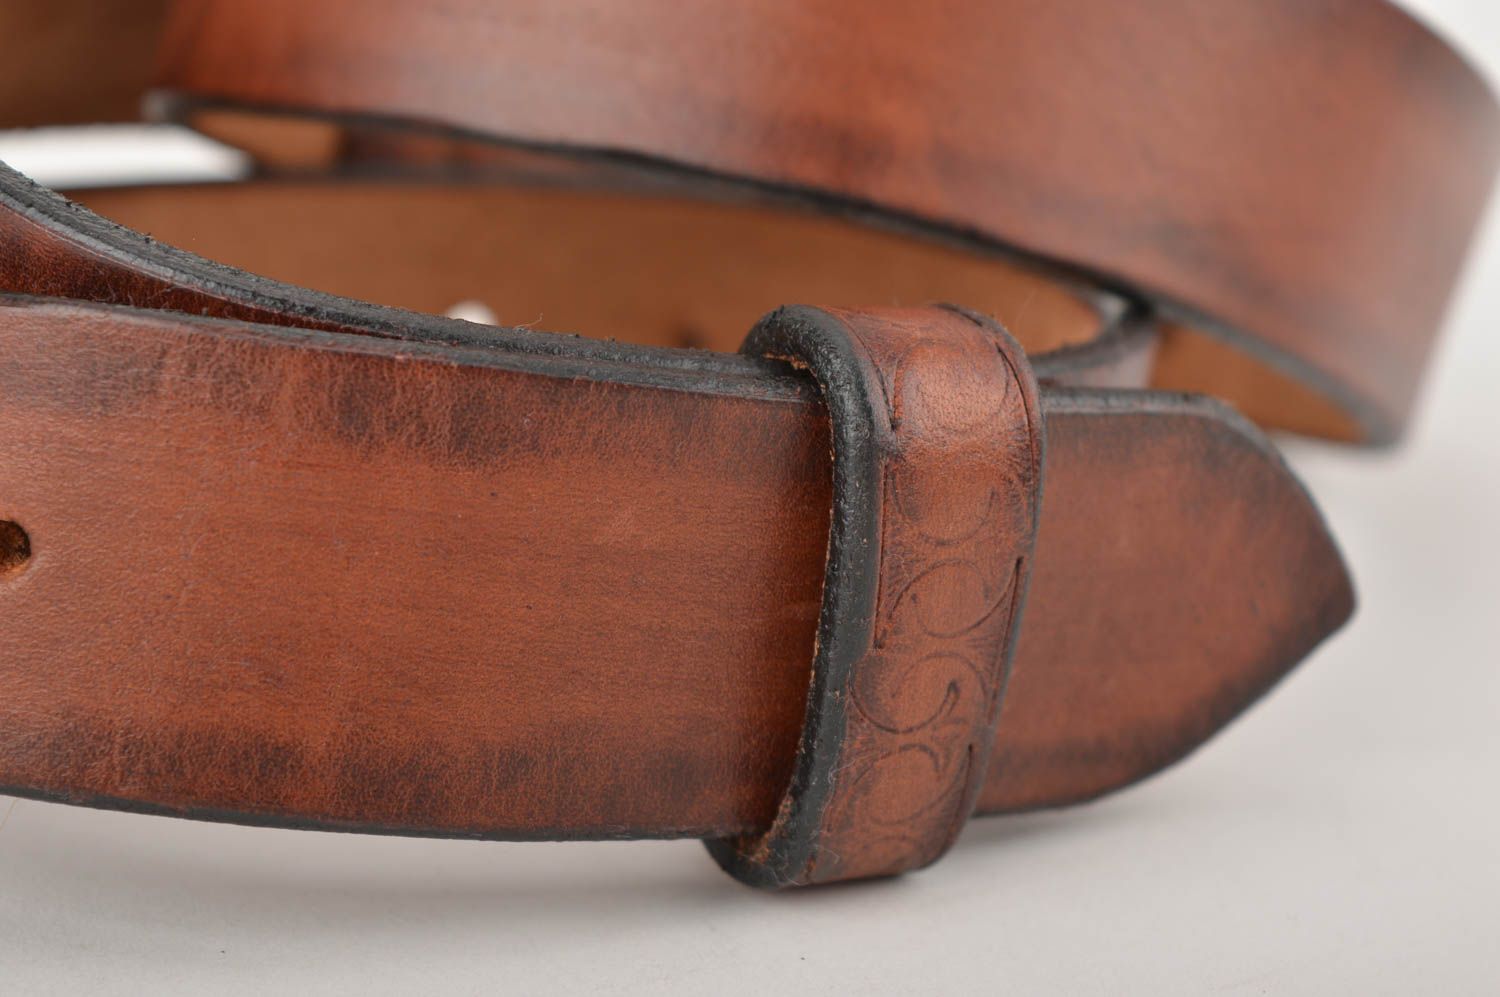 Beautiful handmade leather belt accessories for men leather goods gifts for him photo 5